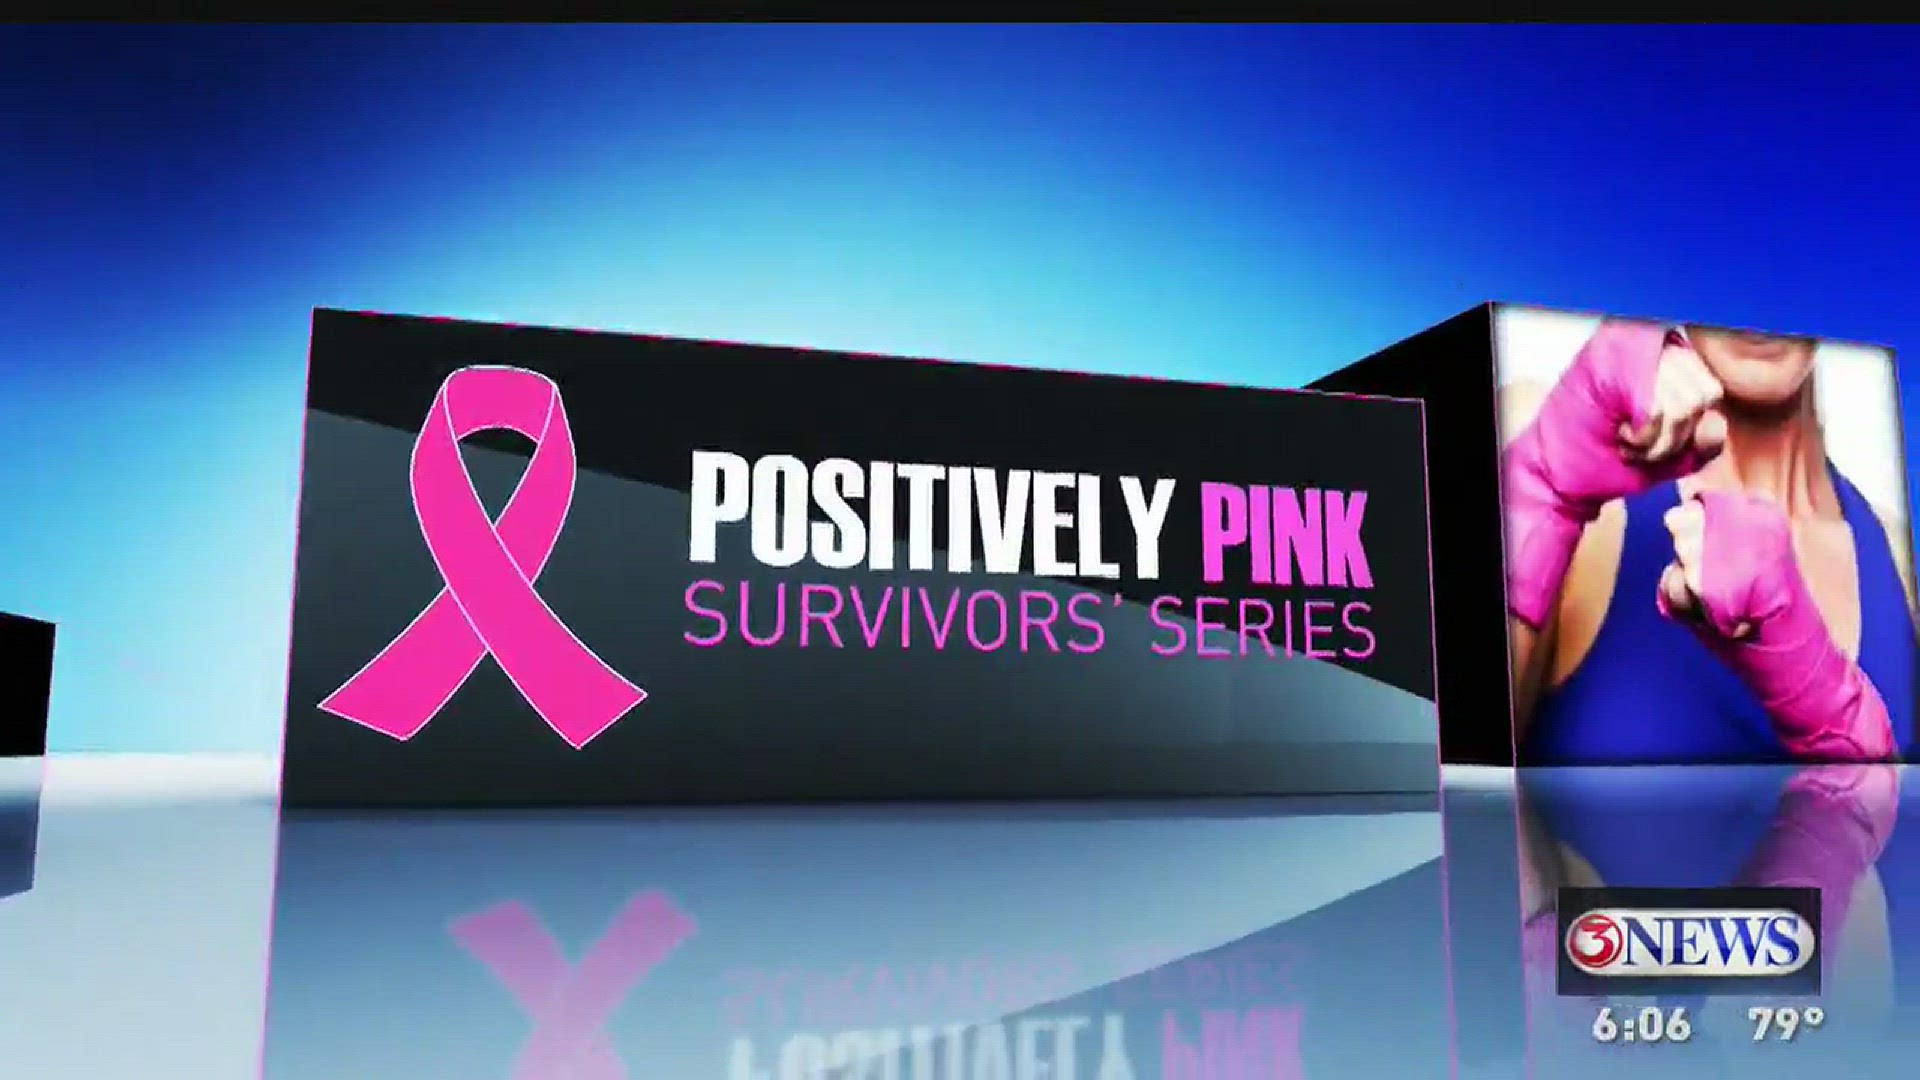 Our Positively Pink: Survivors' Series continues this week with Ana Munoz-Duda. Munoz-Duda detected breast cancer so quickly she did not have to undergo radiation or chemo despite begging for it.